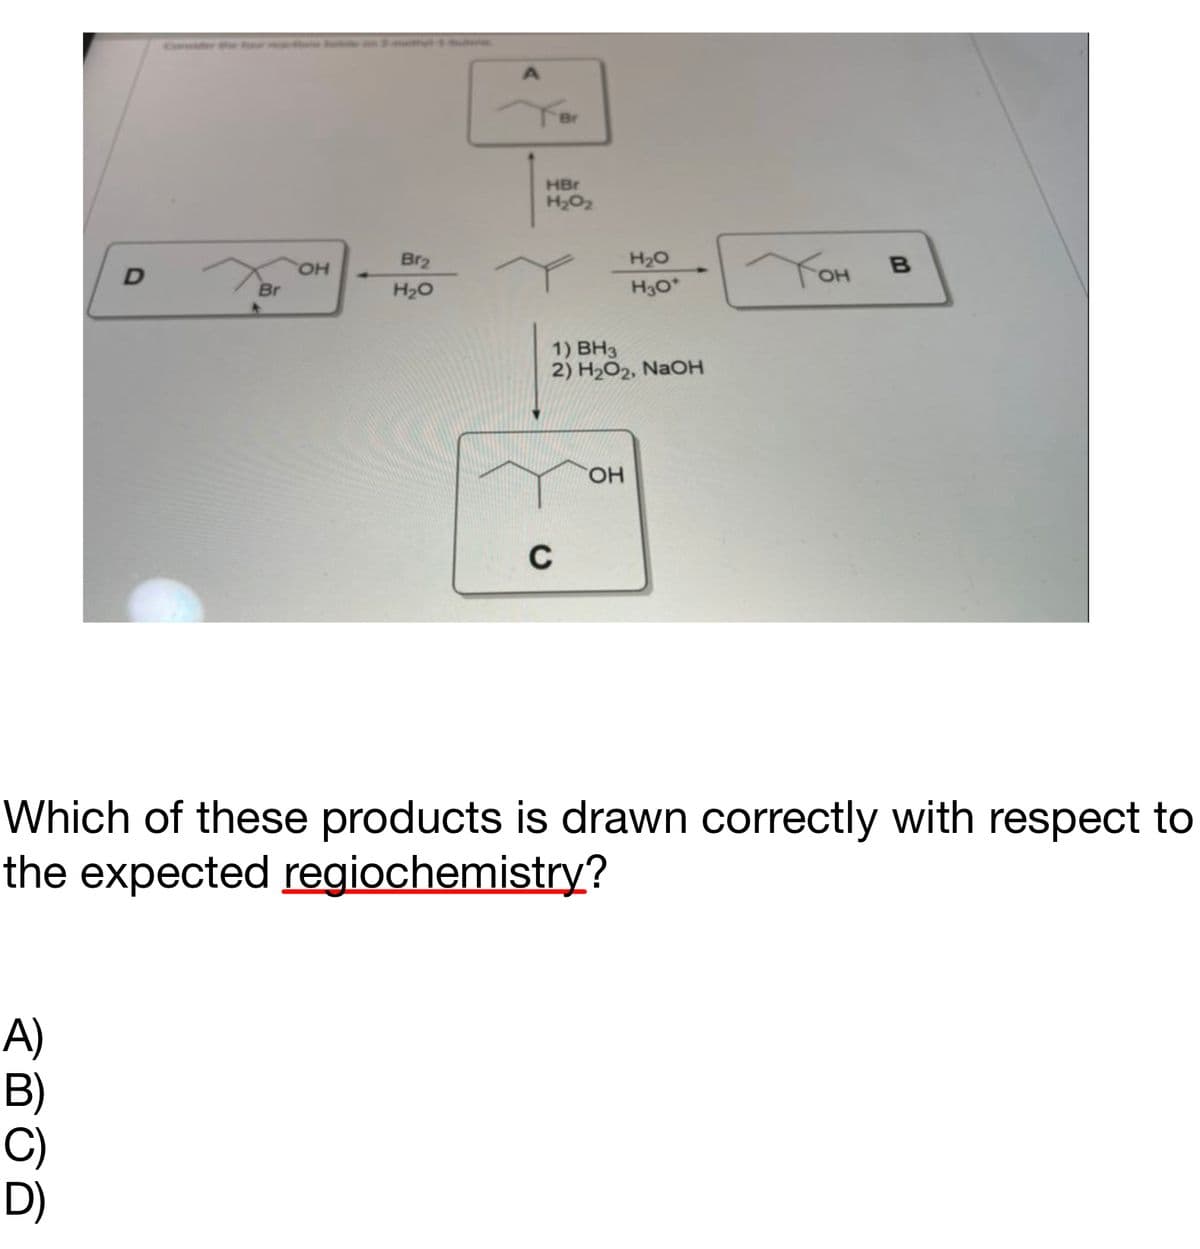 D
A)
B)
Br
OH
Br₂
H₂O
Br
HBr
H₂0₂2
C
1) BH3
2) H₂O2, NaOH
H₂O
H3O*
OH
Тон
B
Which of these products is drawn correctly with respect to
the expected regiochemistry?